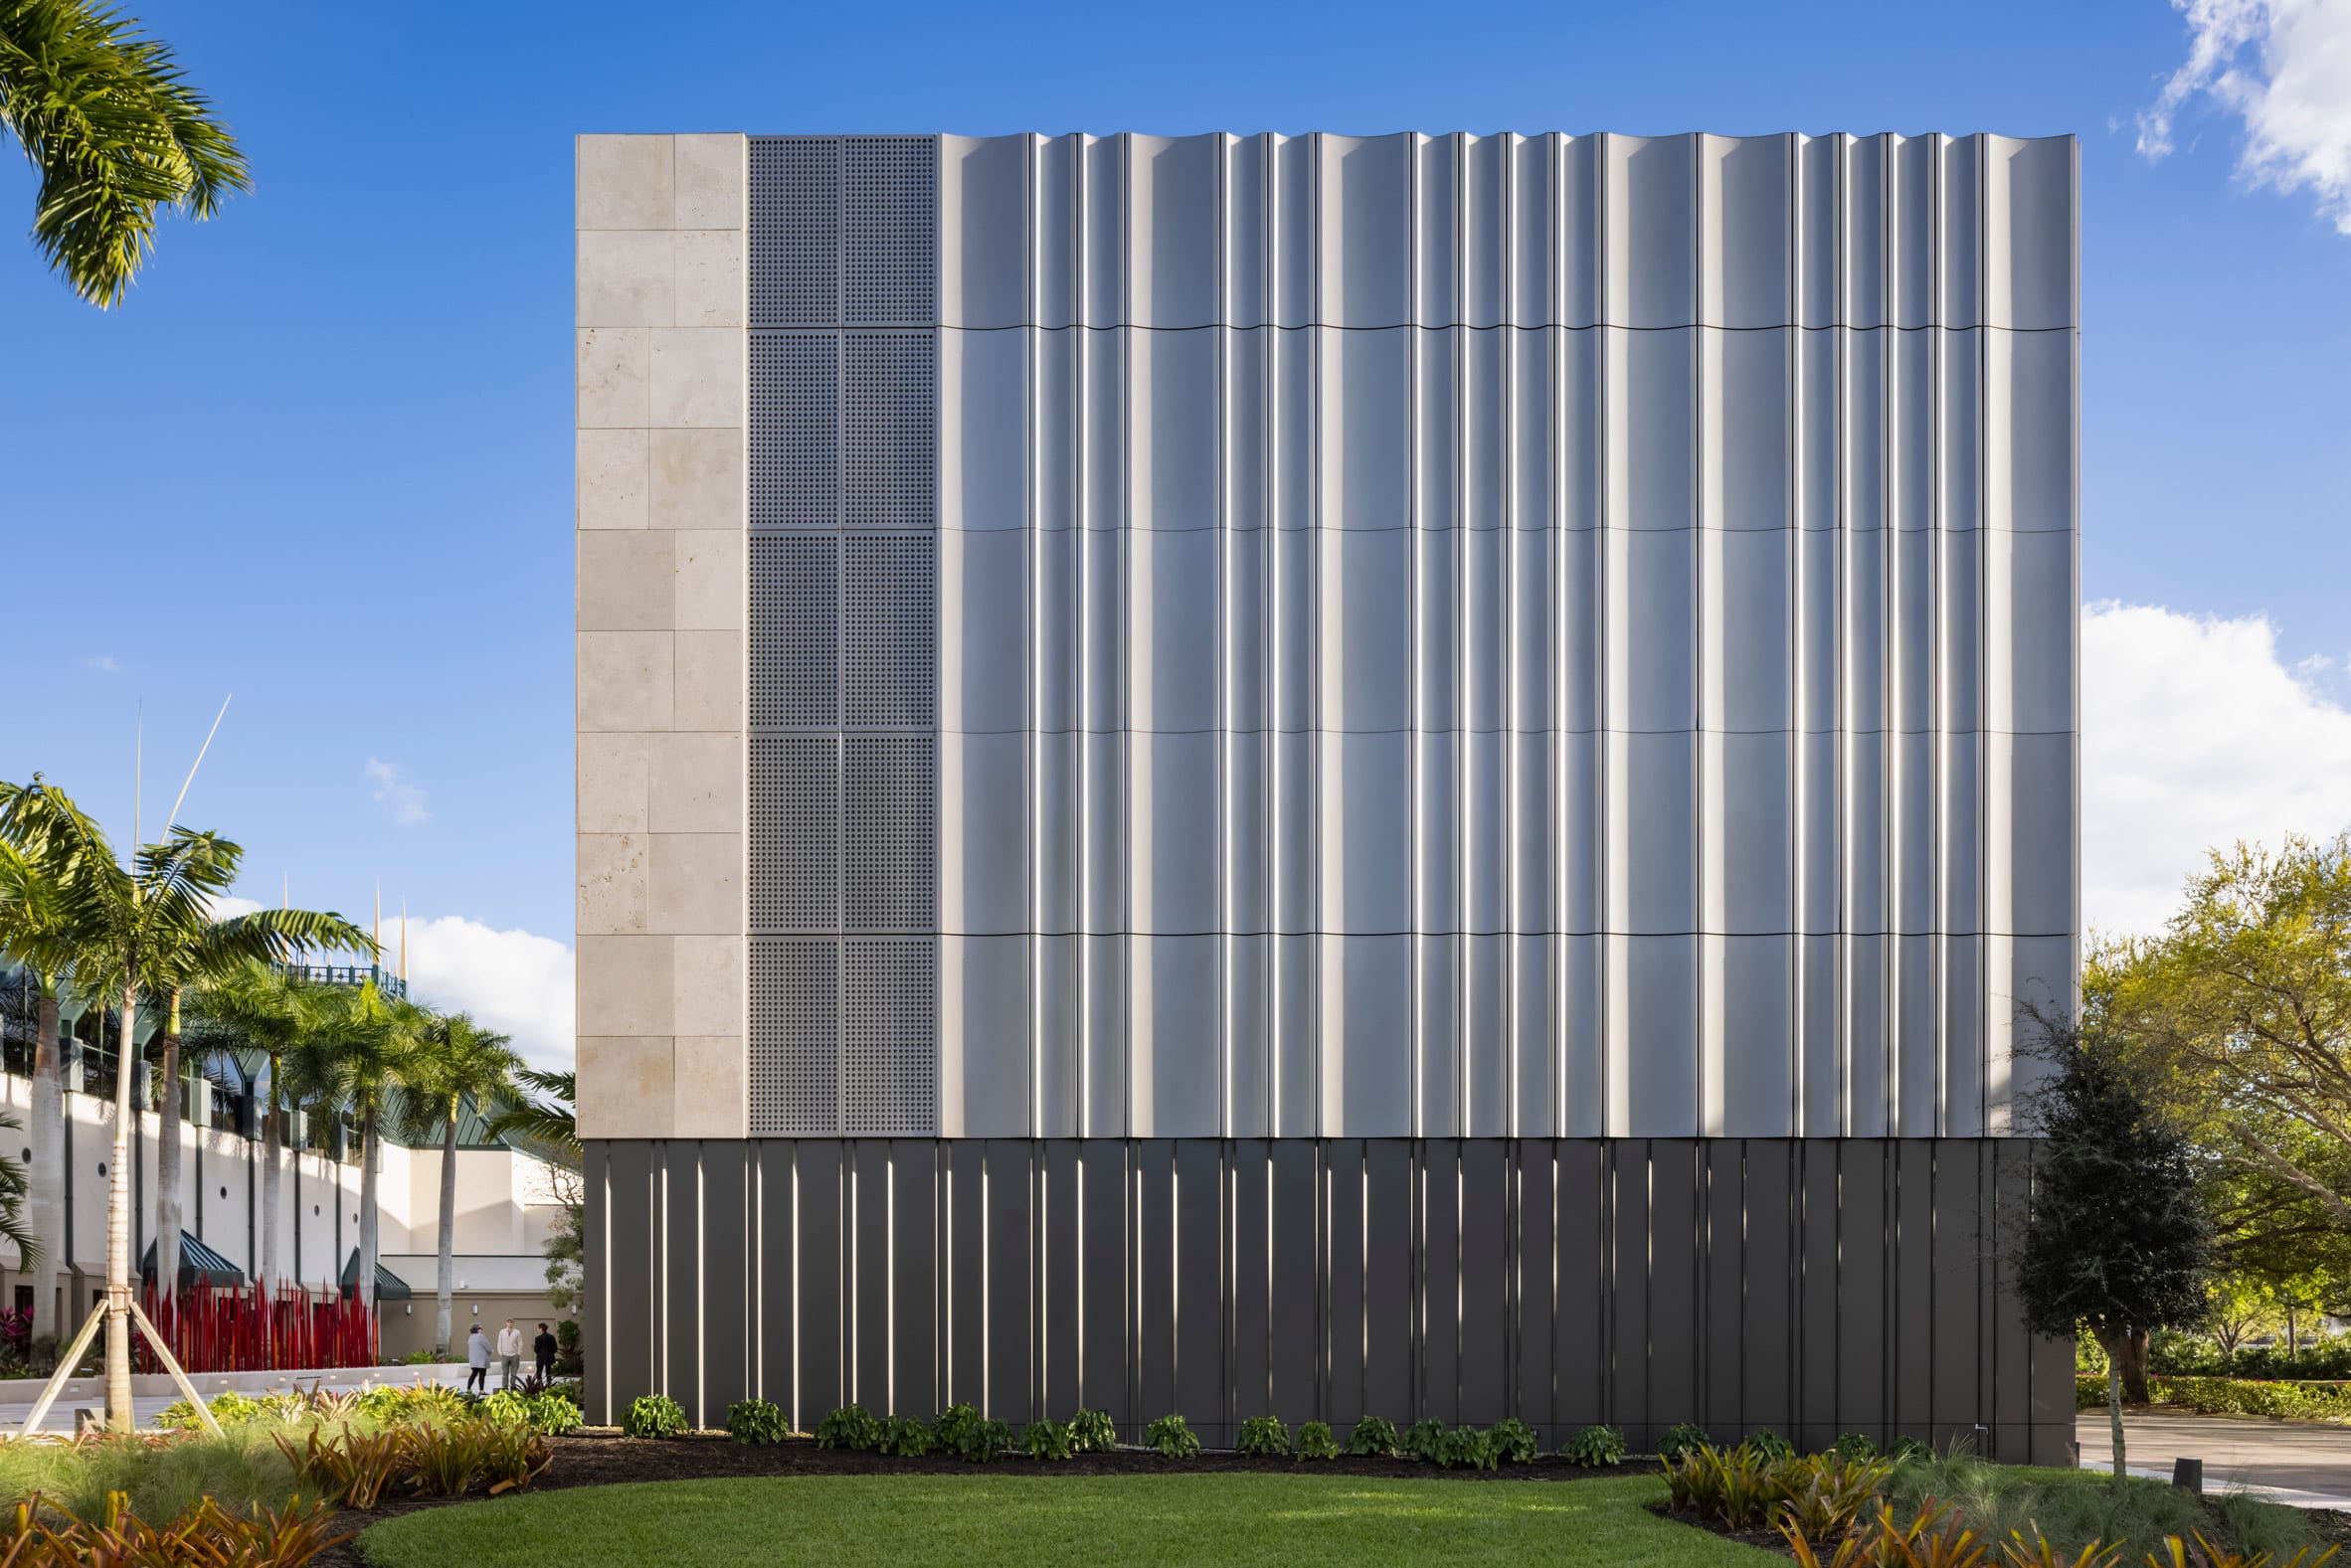 Limestone and metal facade of the Baker Museum in Florida